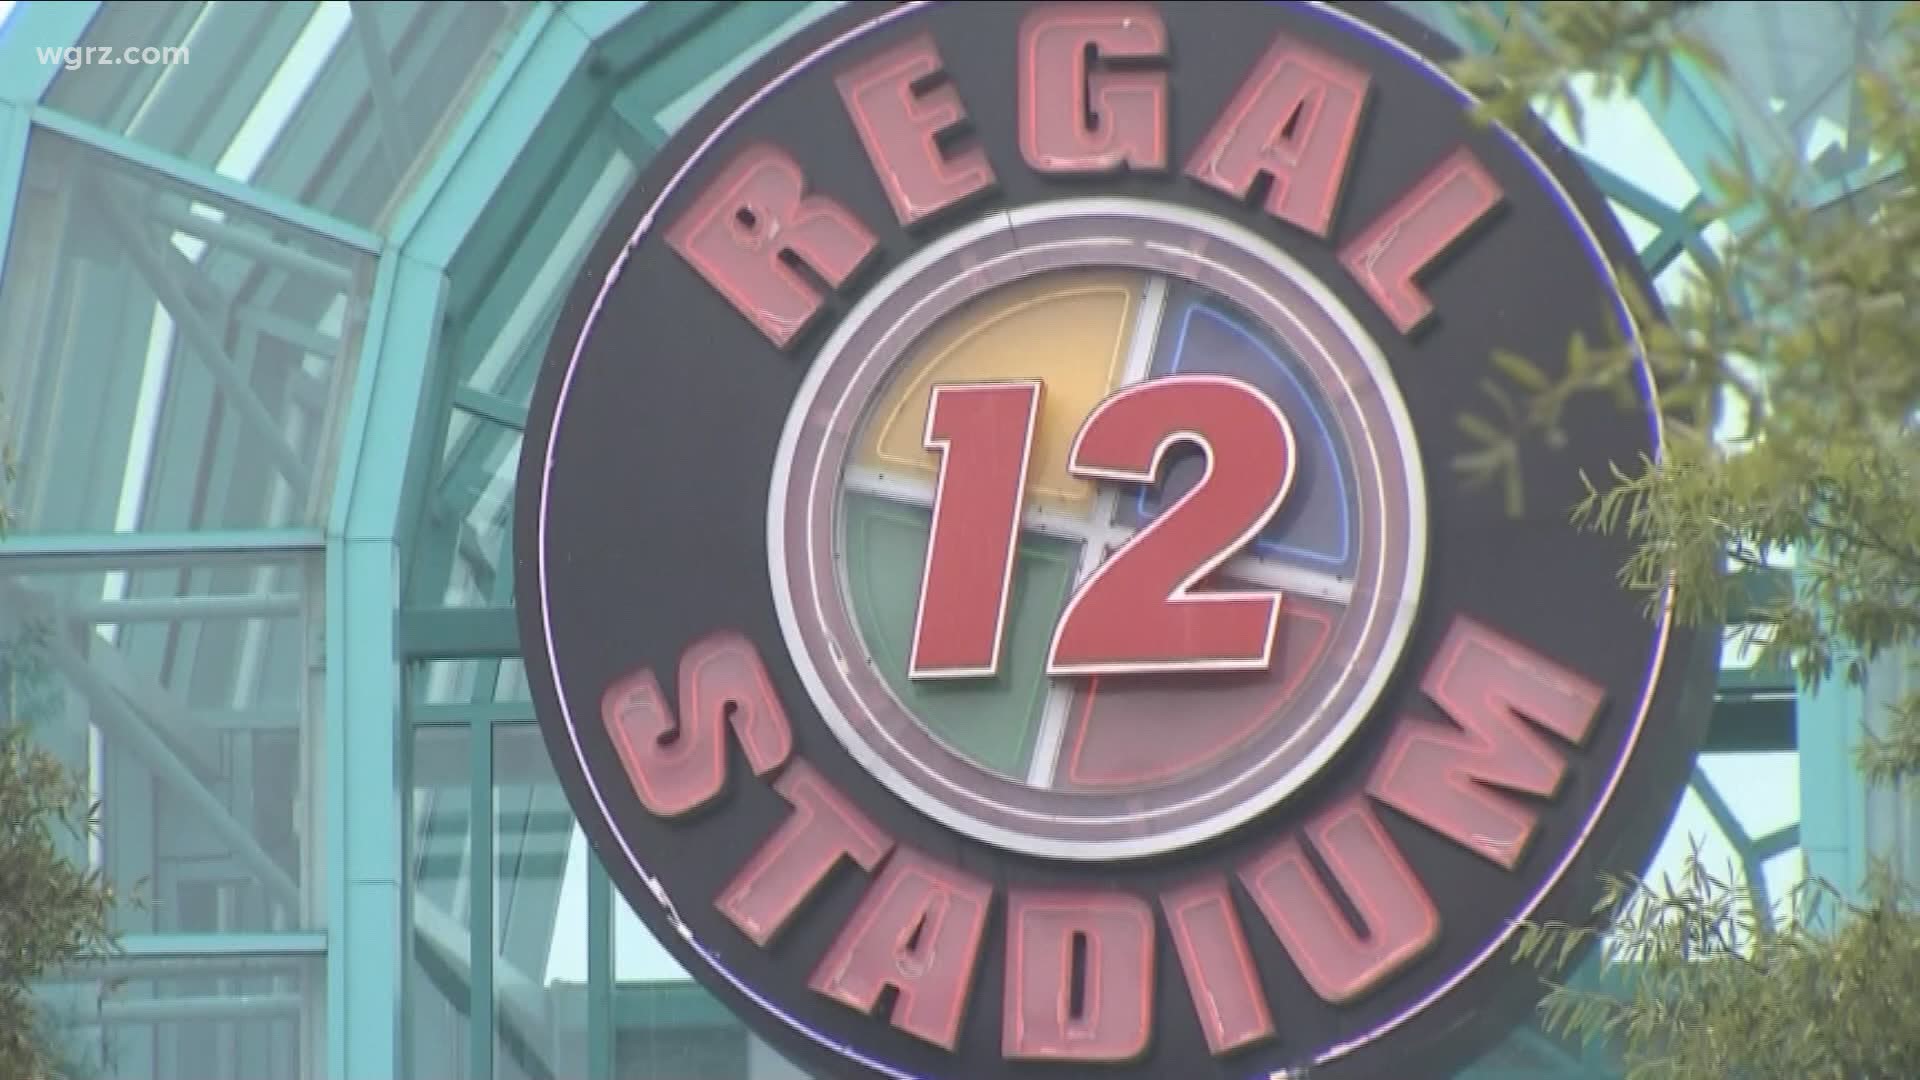 The movies are back! Regal Cinemas announced today it will begin reopening movie theaters nationwide starting next week and have them all open by July 10th.